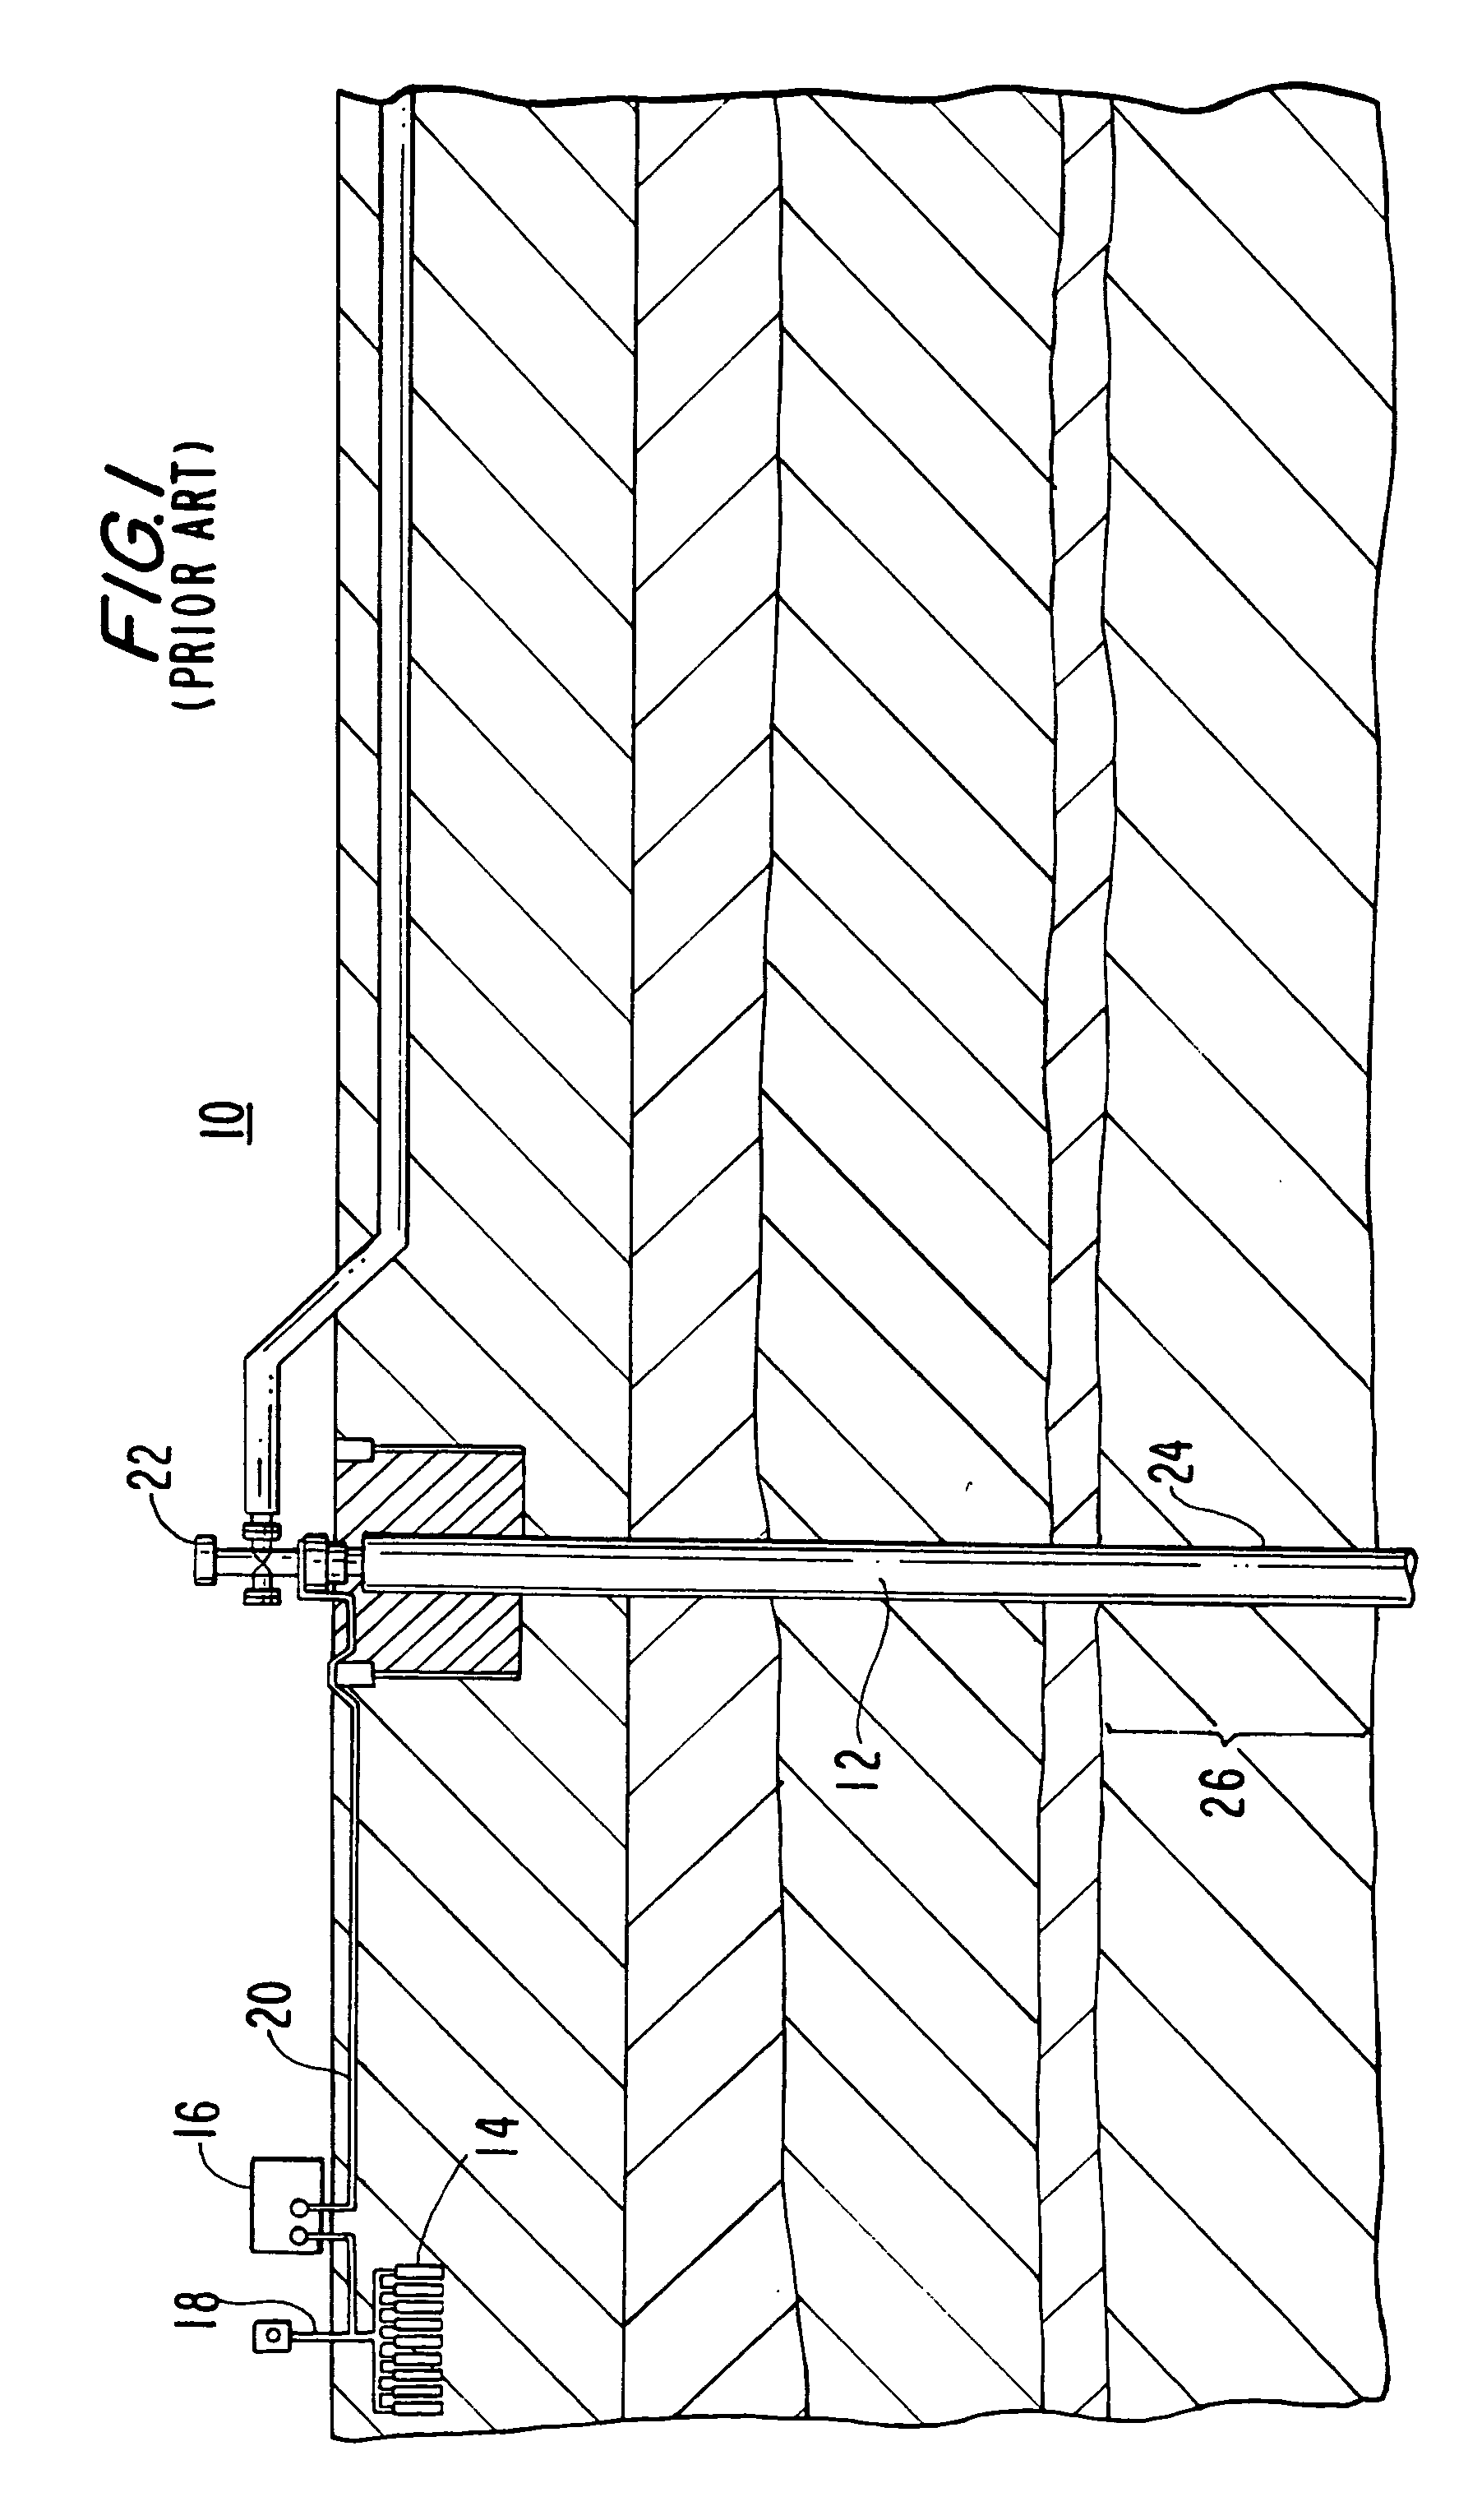 Axial current meter for in-situ continuous monitoring of corrosion and cathodic protection current